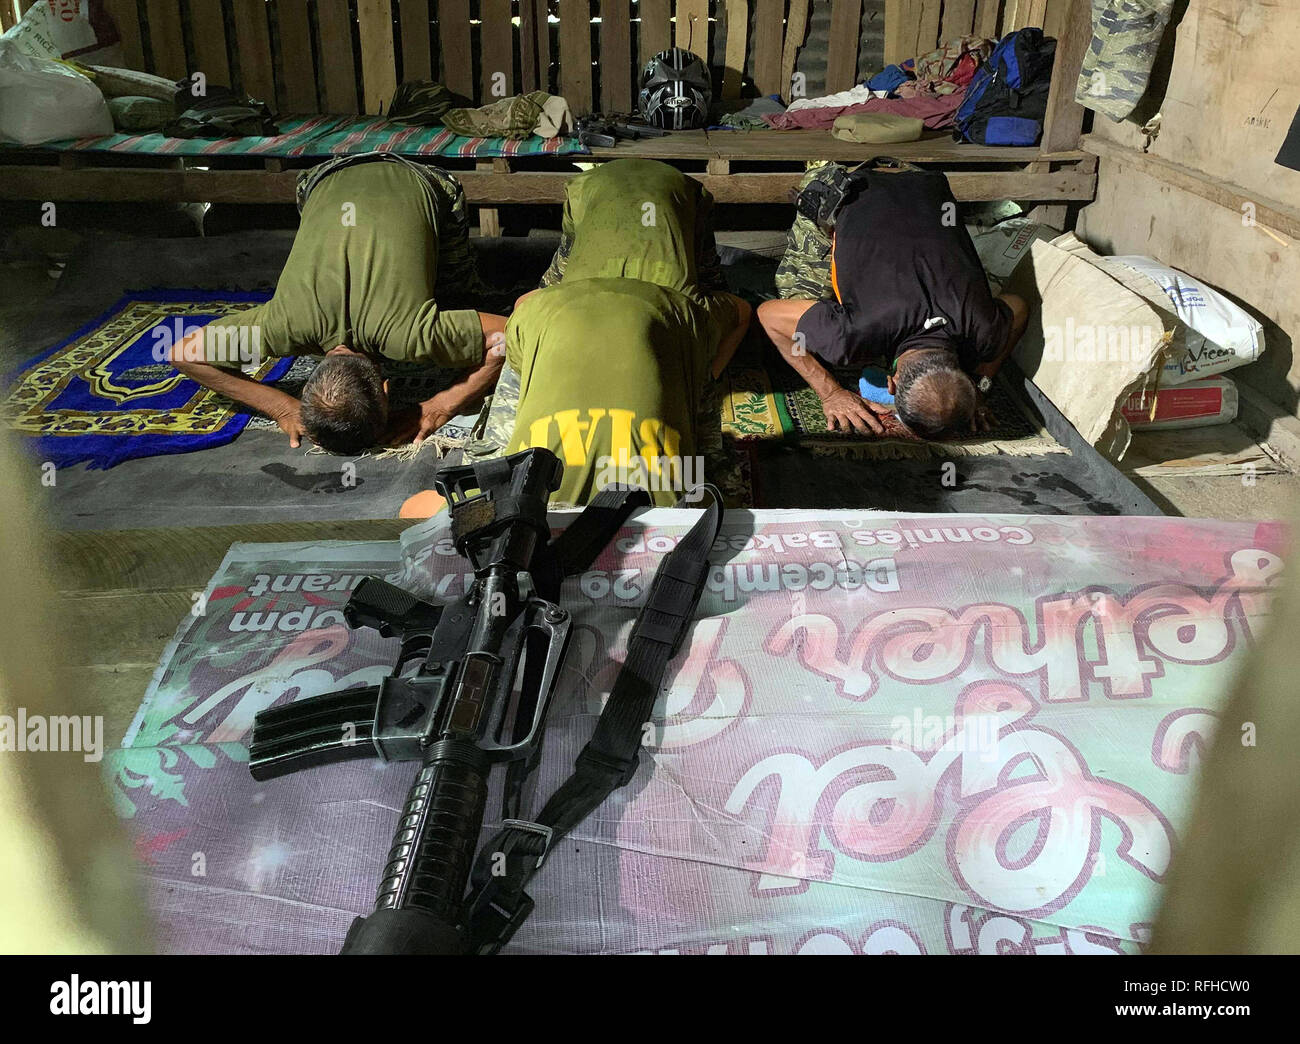 Maguindanao, Philippines. 26th January 2019.  Filipino Muslim rebels pray inside their detachment in Sultan Kudarat town in Maguindanao in the southern Philippines, Saturday, January 26, 2019, a day after the Comelec announced Bangsamoro Organic Law (BOL) was “deemed ratified,” as officials released figures showing that more than 1.5 million registered voters had cast “yes” ballots for the law’s ratification versus nearly 200,000 who had voted against it.  The law aims to give the impoverished south an expanded autonomous area. Credit: Jeoffrey Maitem/Alamy Live News Stock Photo